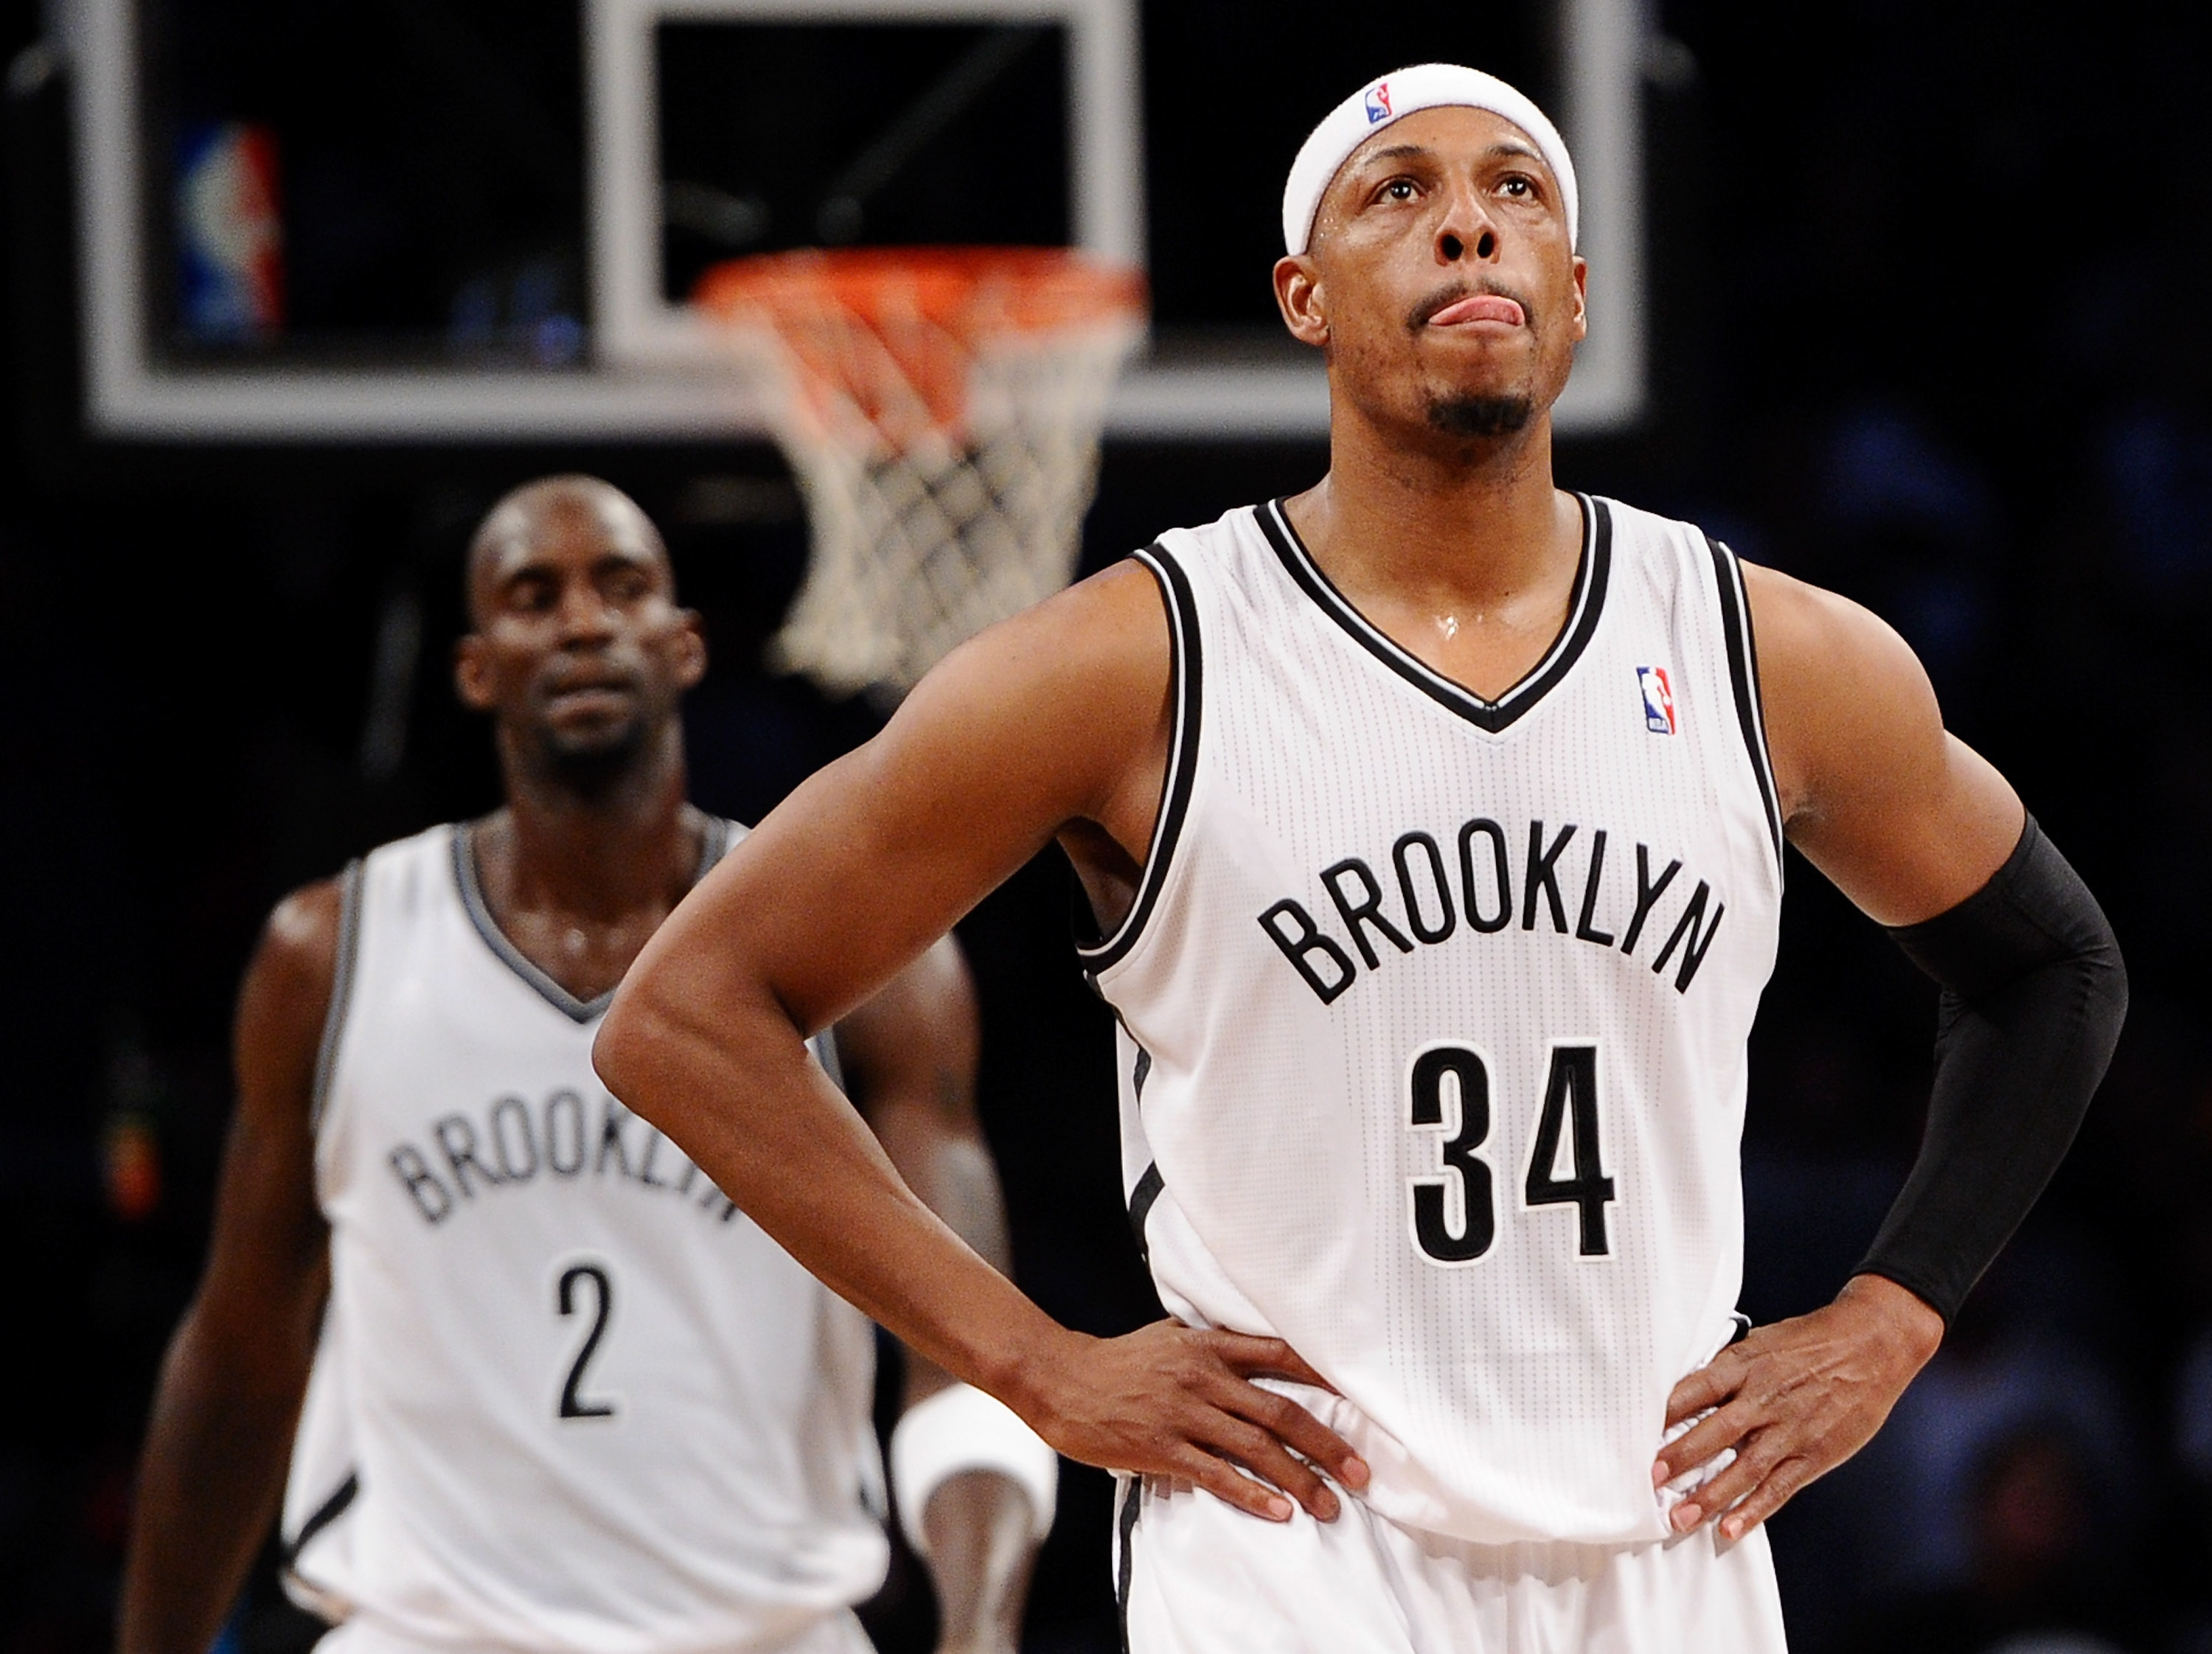 Paul Pierce looks on during a Brooklyn Nets game in 2013